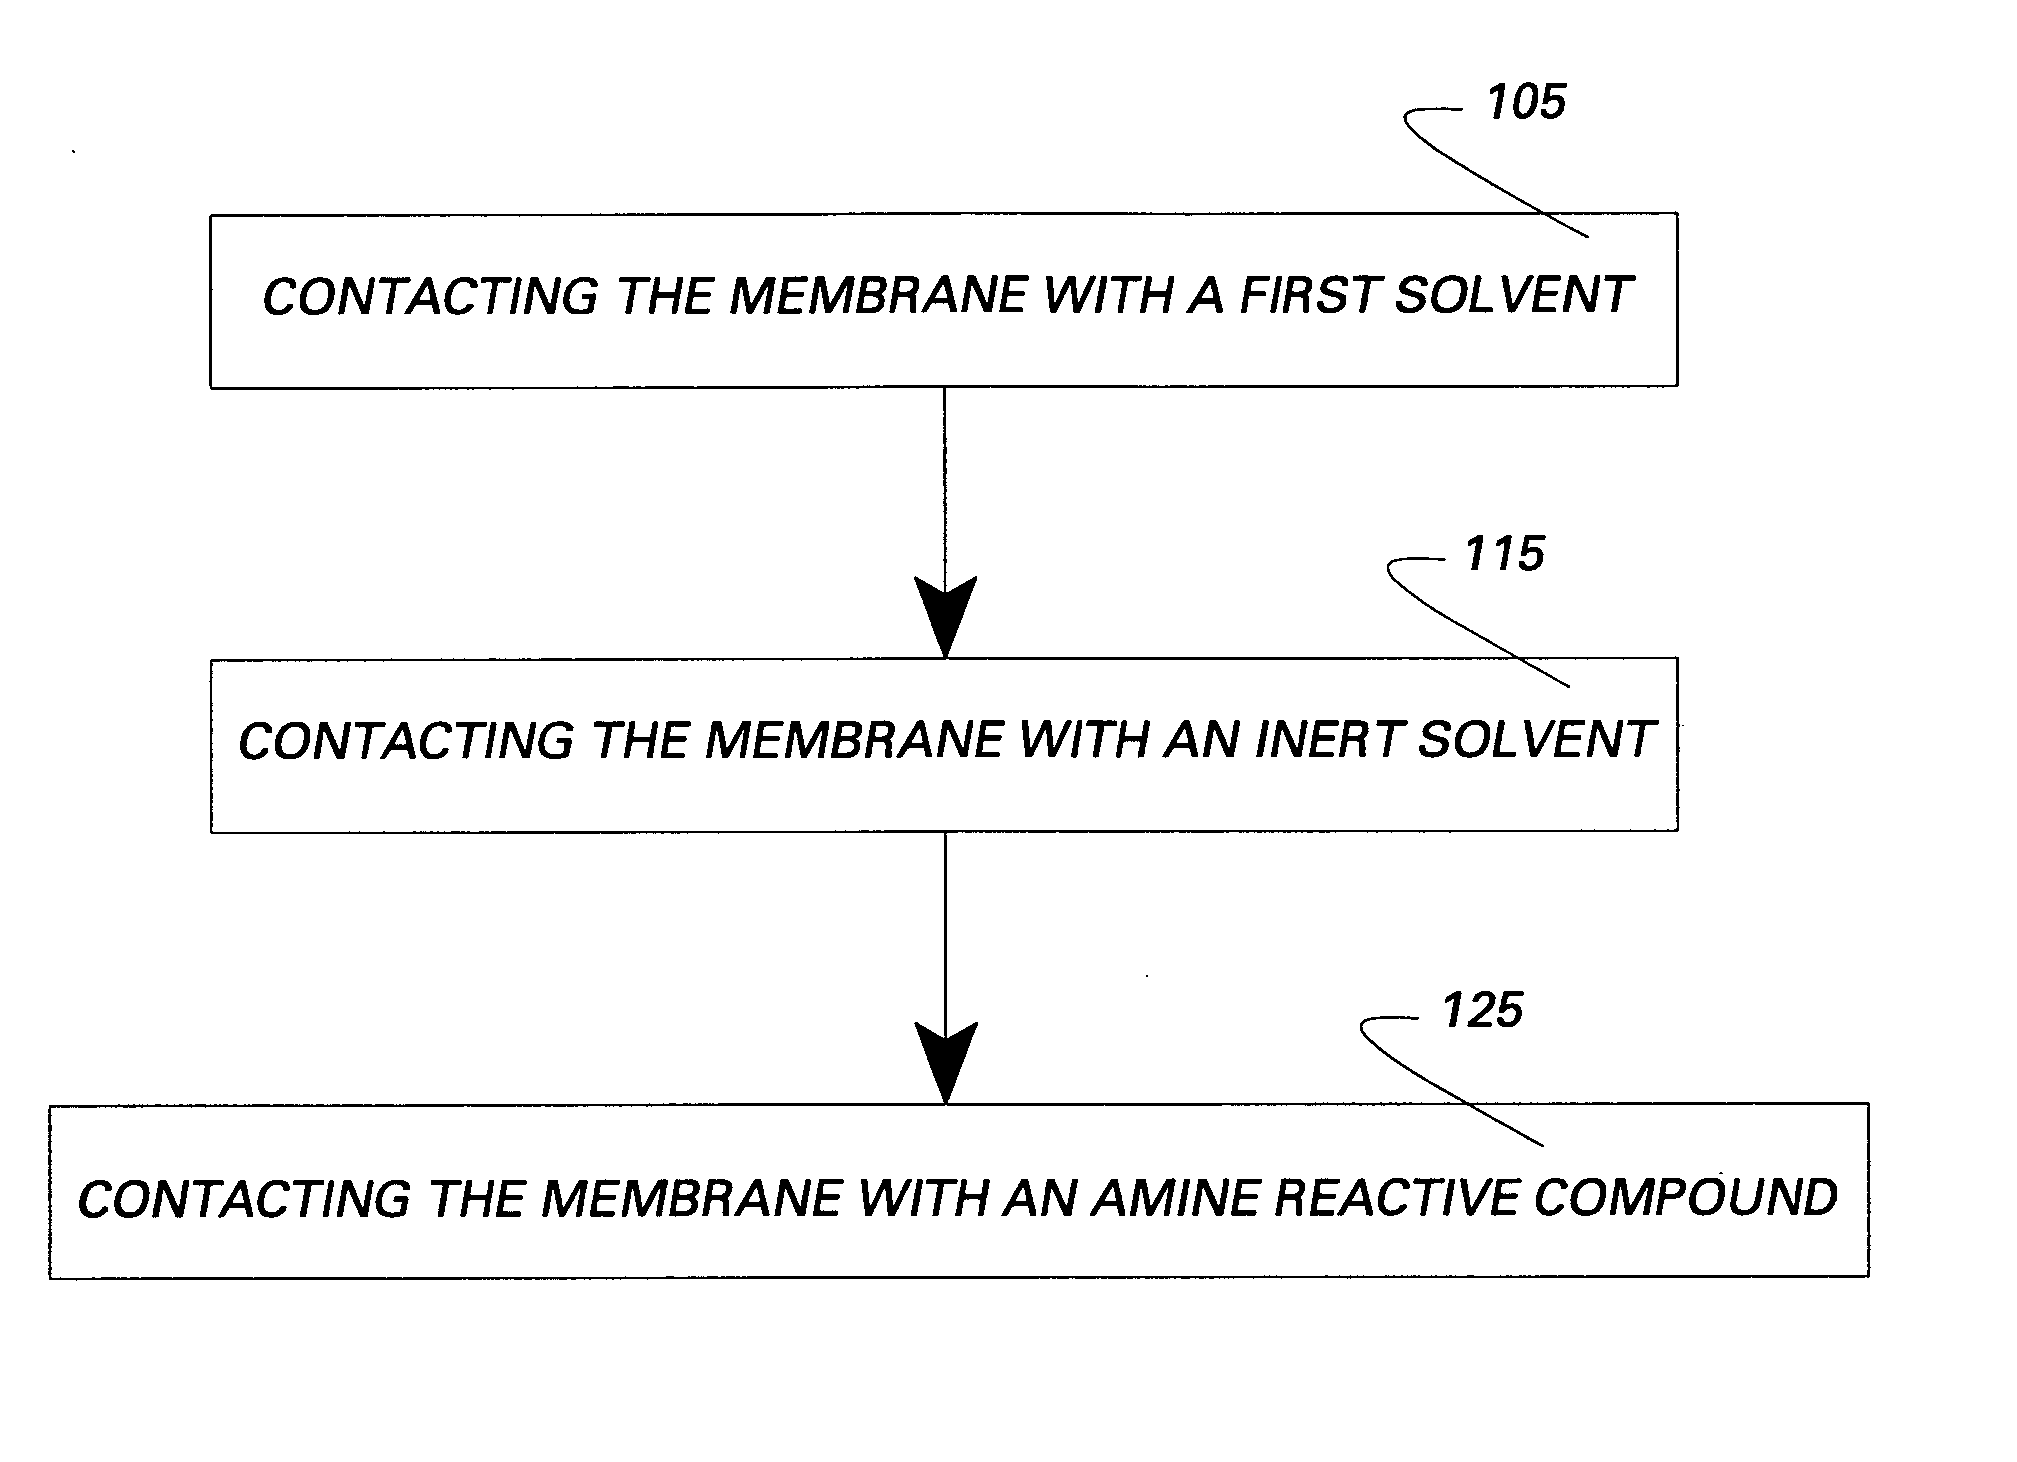 Membranes and methods of treating membranes